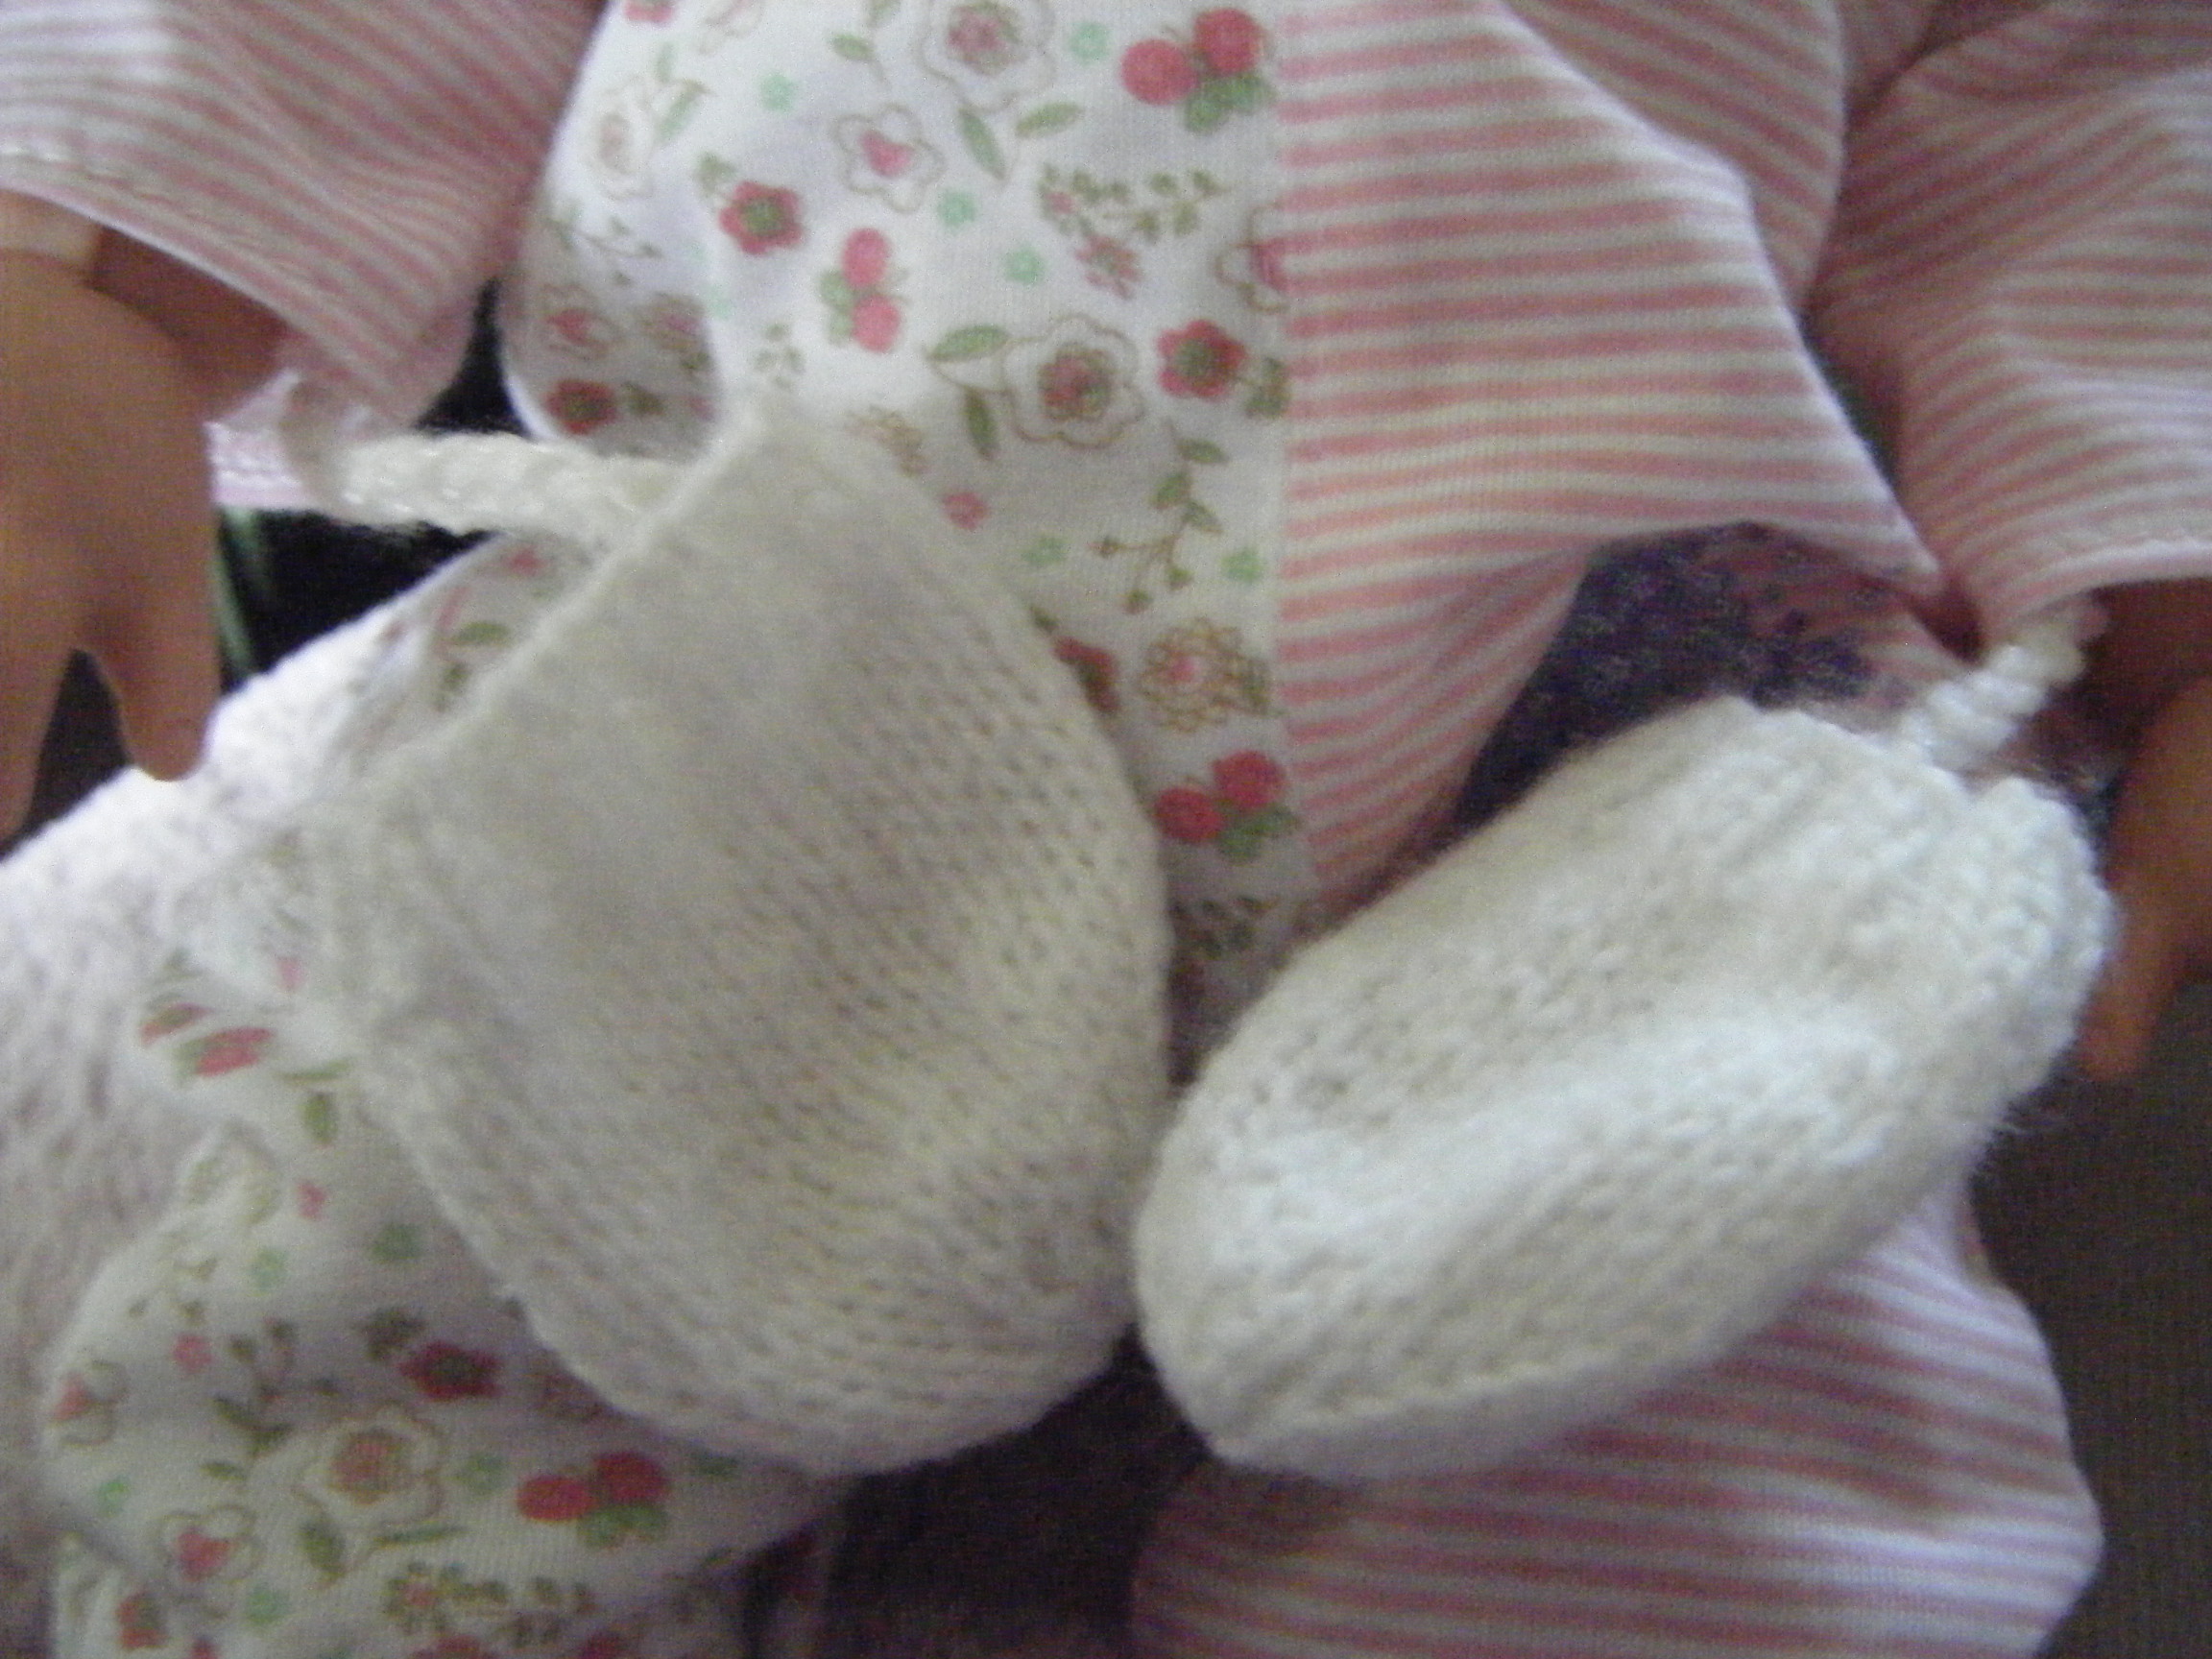 Baby crafts - free knitting, crochet and sewing patterns to make